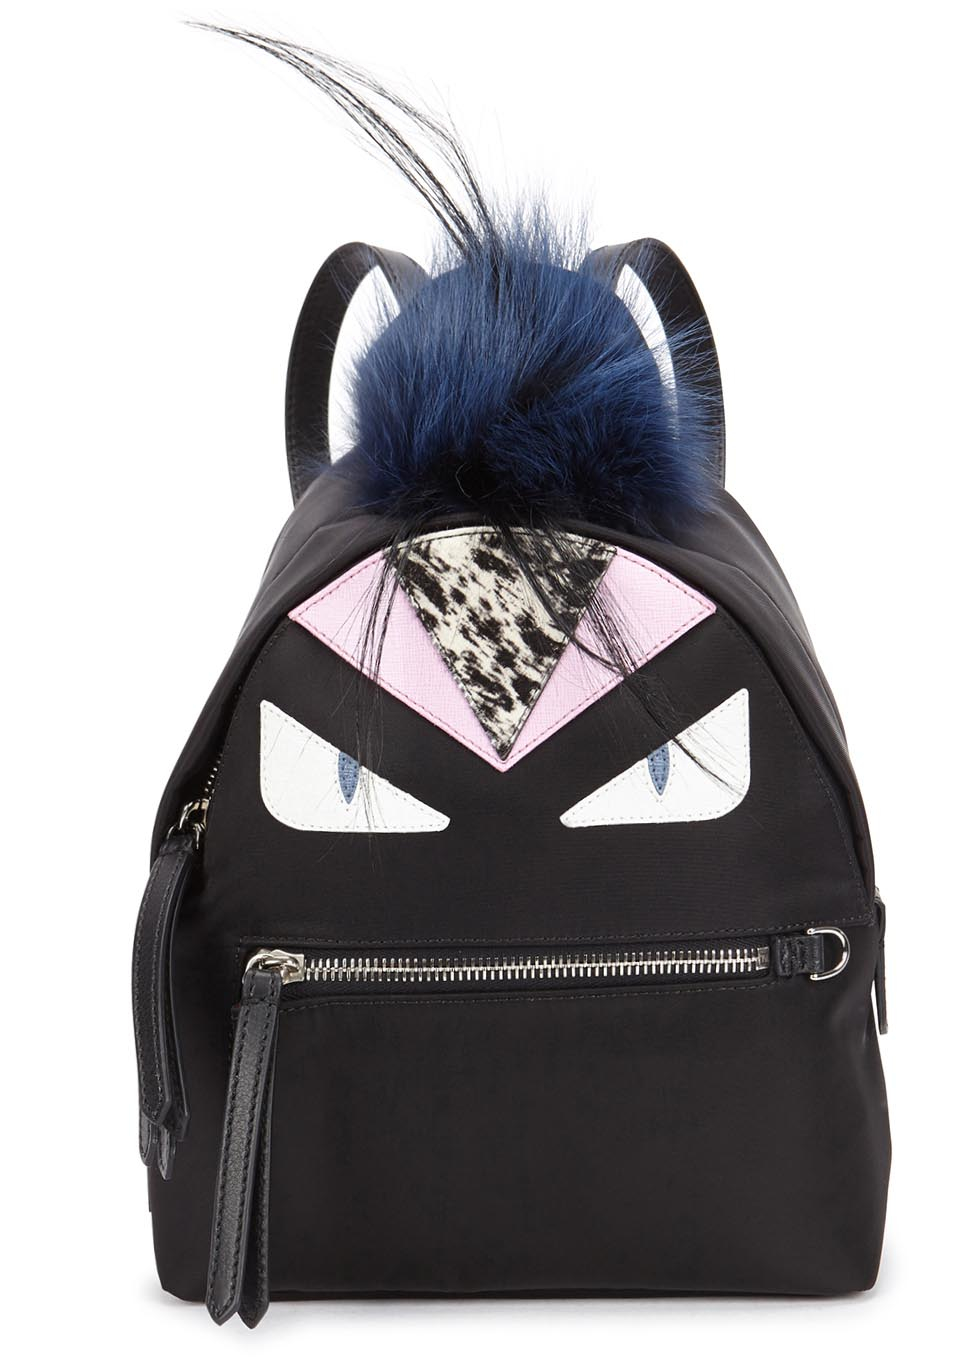 Fendi Synthetic Zaino Monster Face Embellished Backpack in Black - Lyst